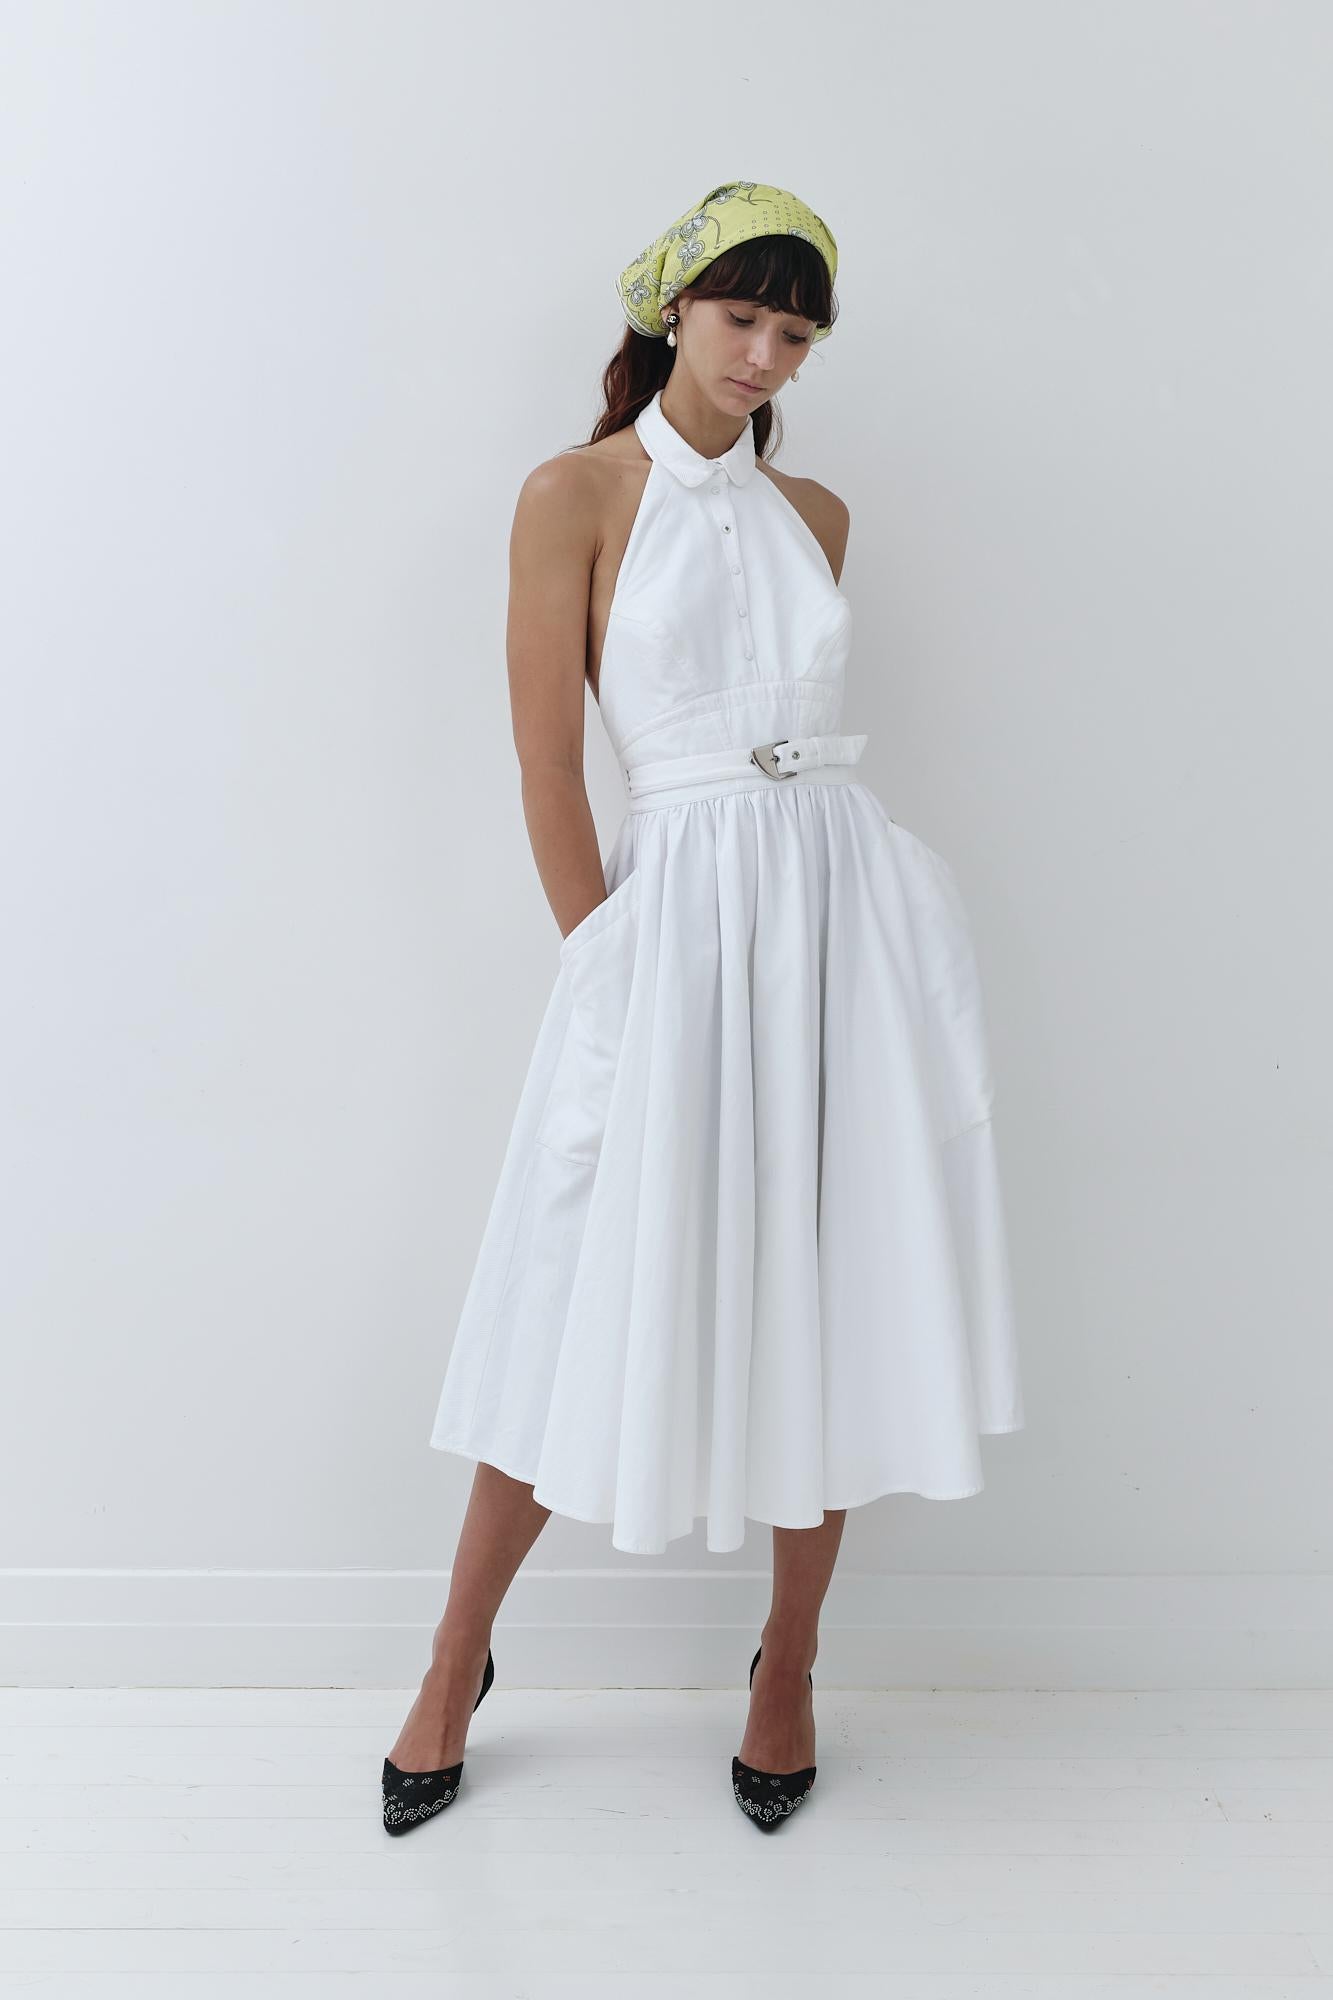 Dating to the 80's, this stunning dress is an amazing example of Mugler's mastery of tailoring. Made from stiff cotton pique, it features a collared halter neck, nipped-in waist, full skirt with pockets and waist belt with a chunky silver buckle.